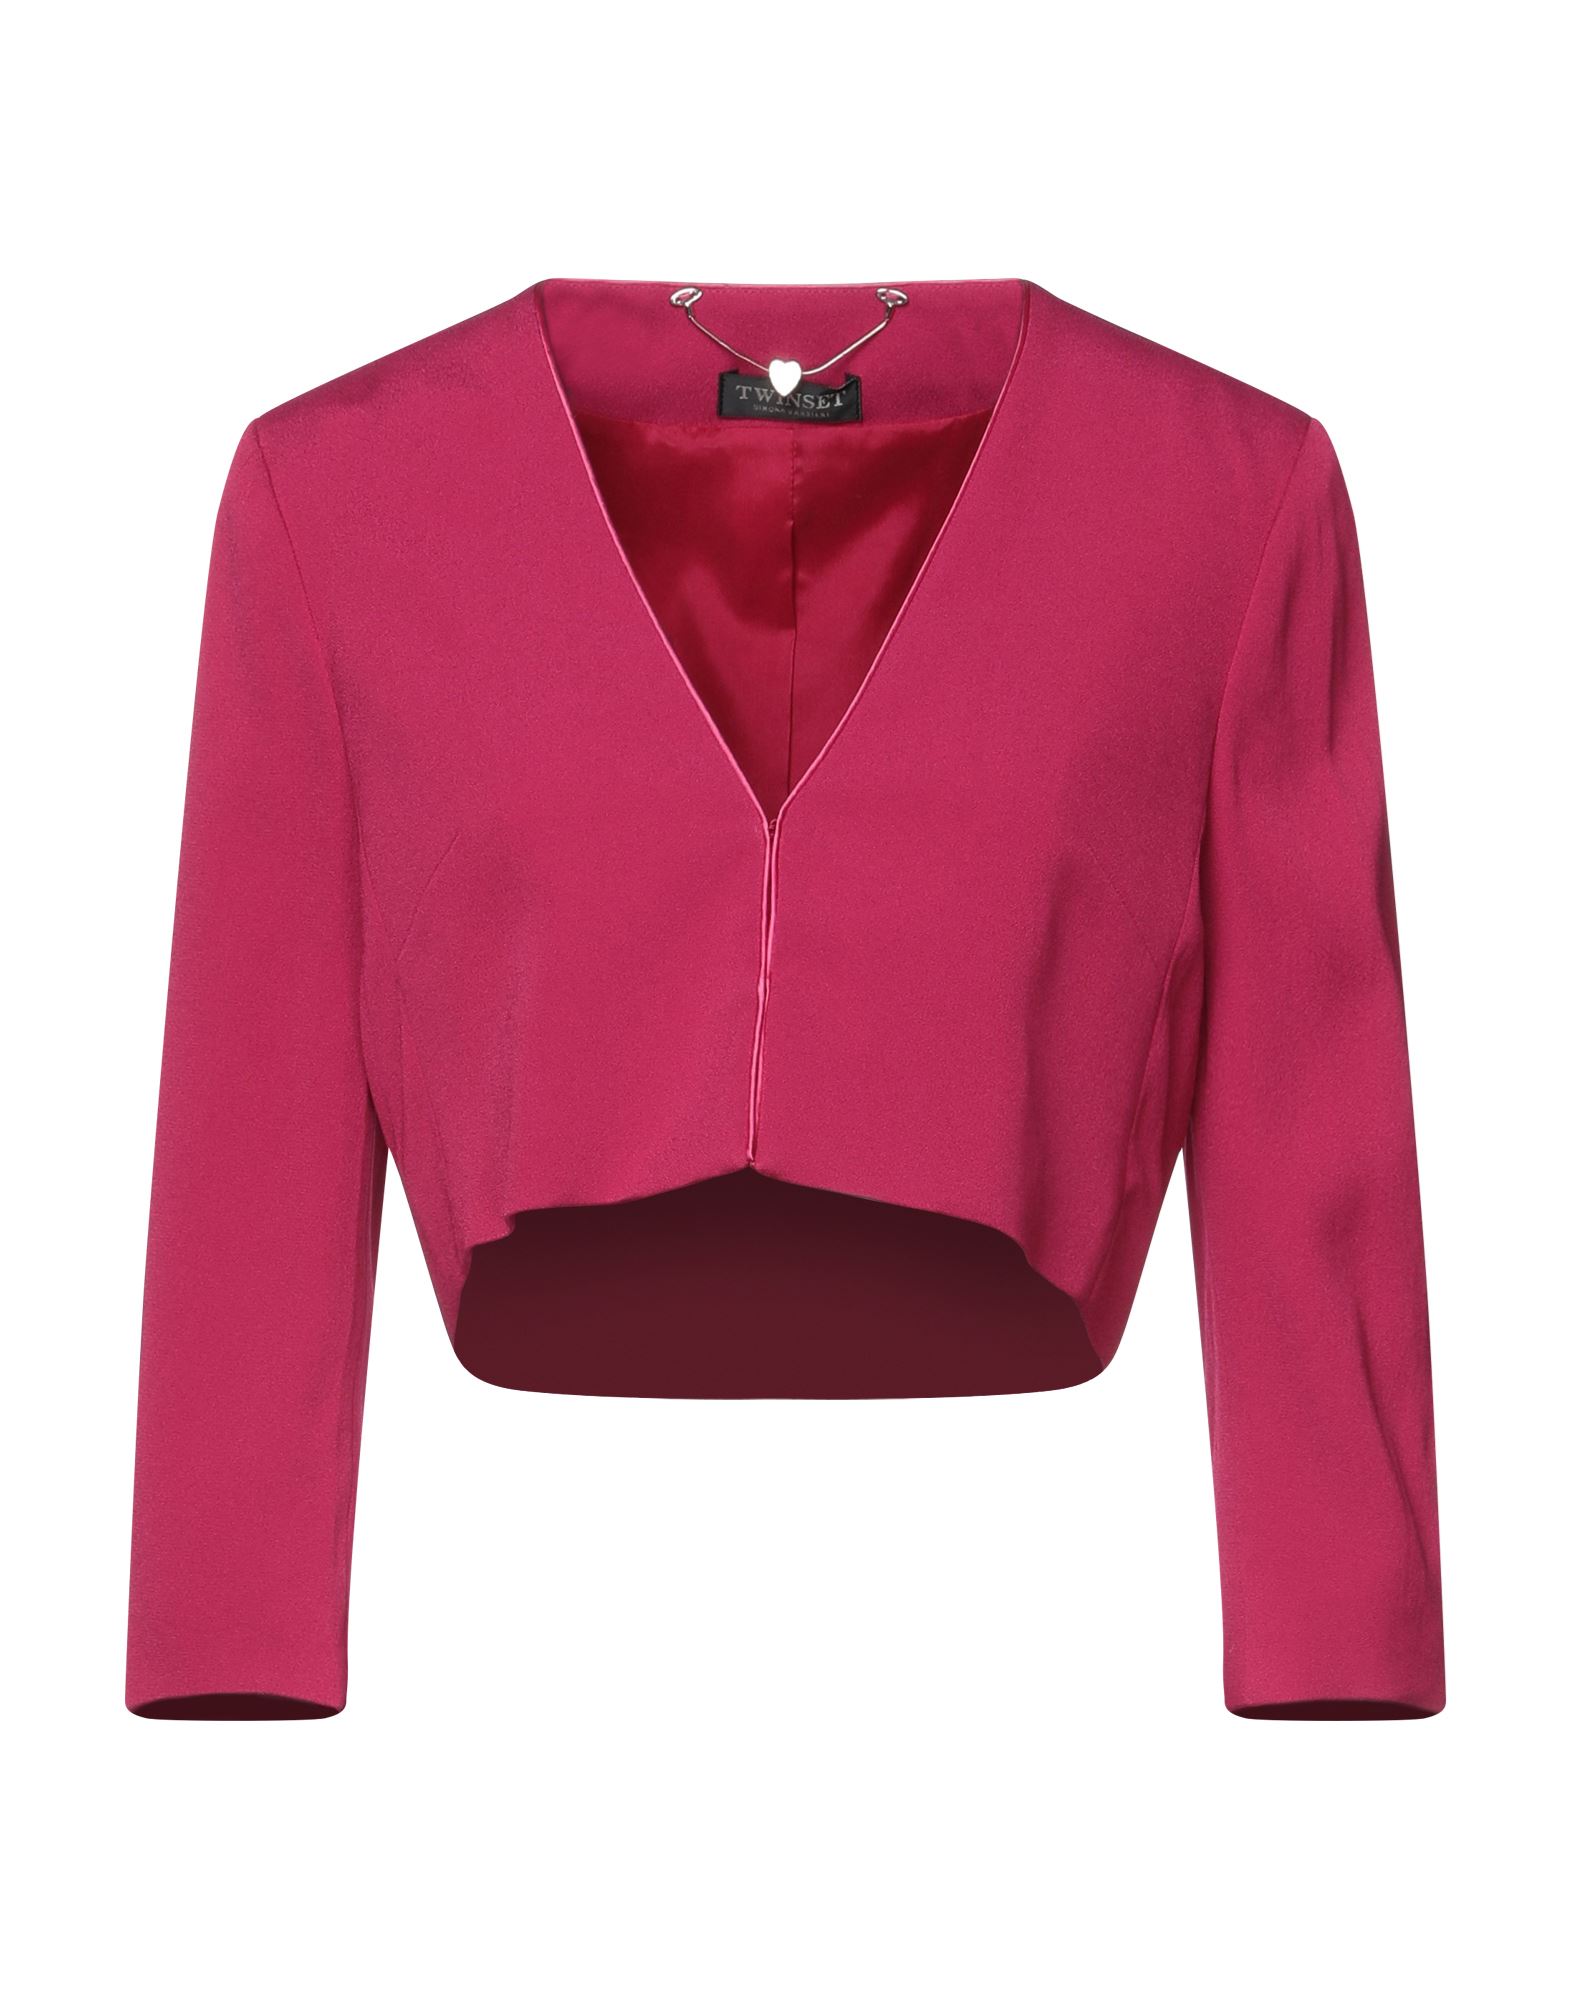 Twinset Suit Jackets In Pink